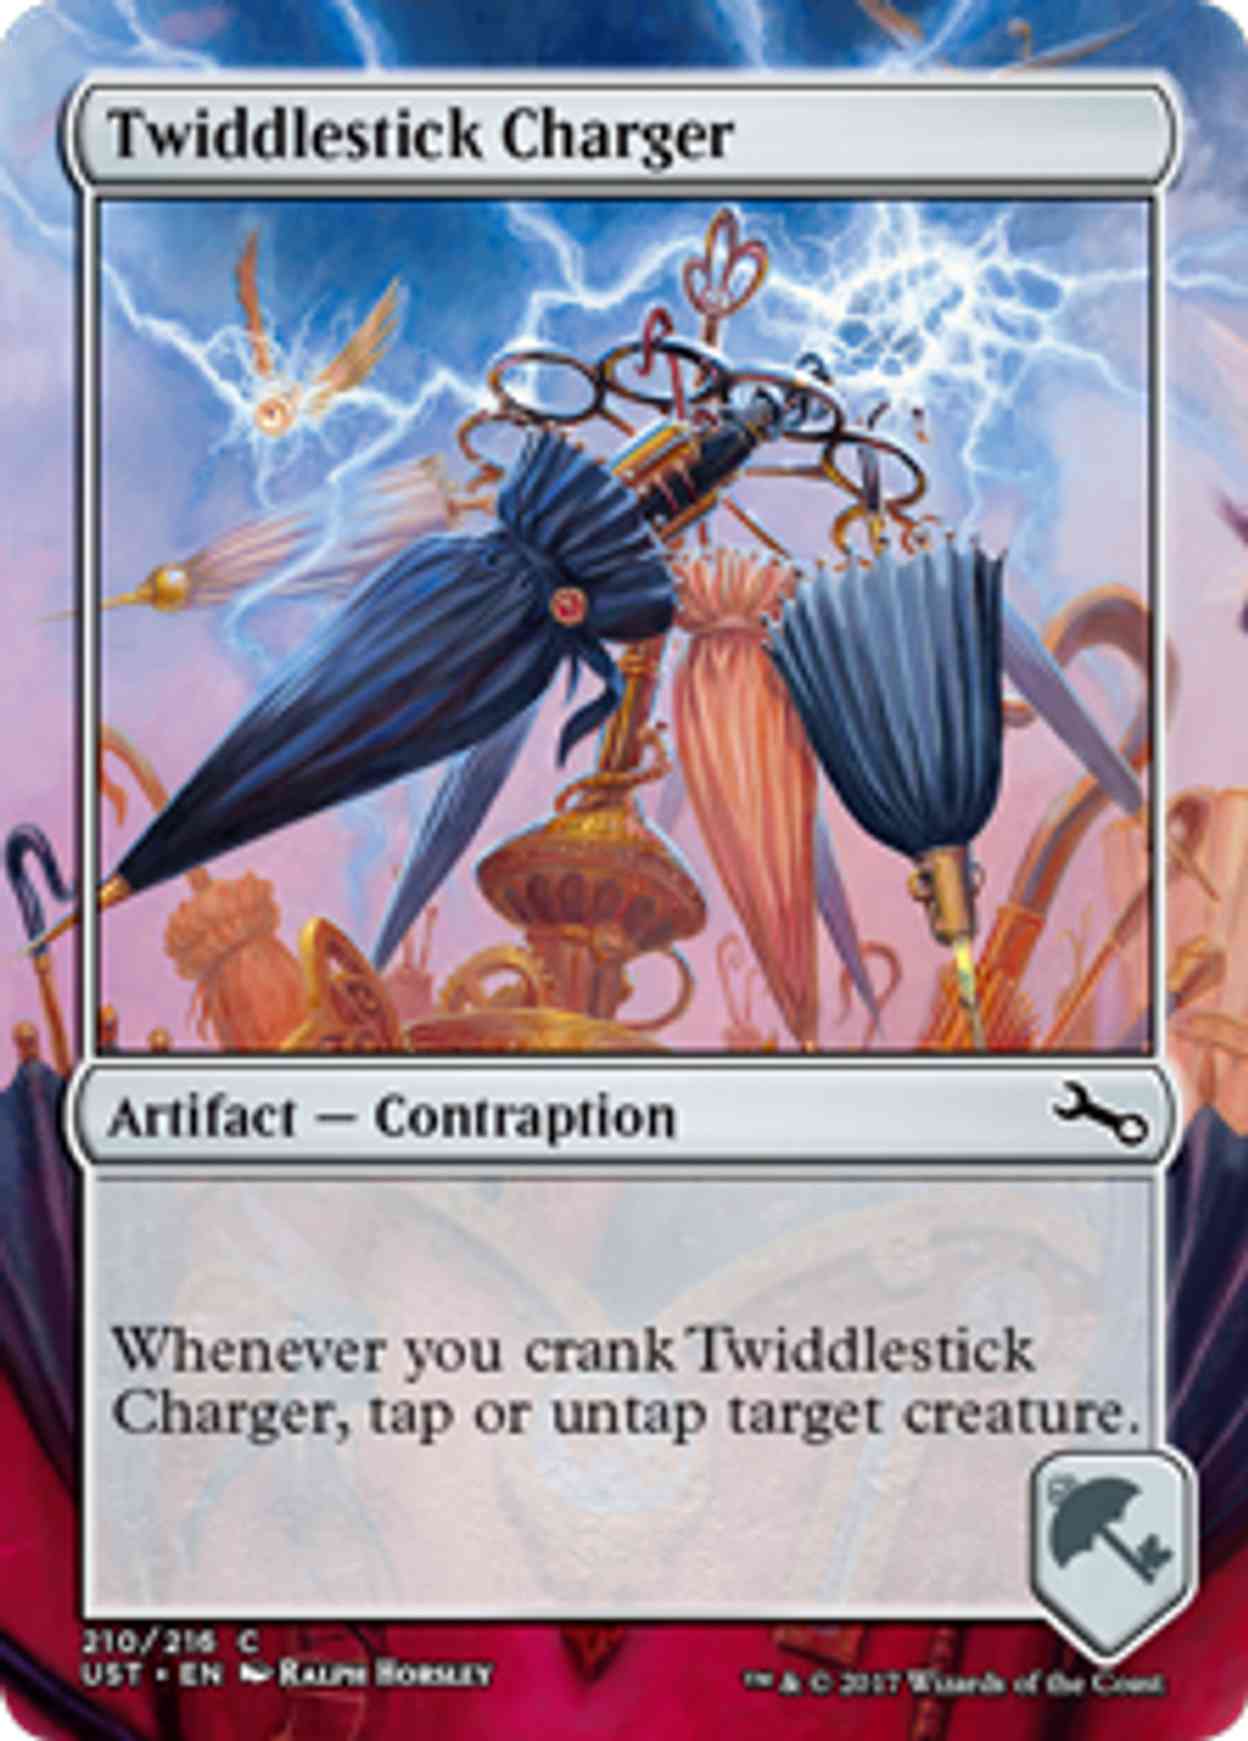 Twiddlestick Charger magic card front